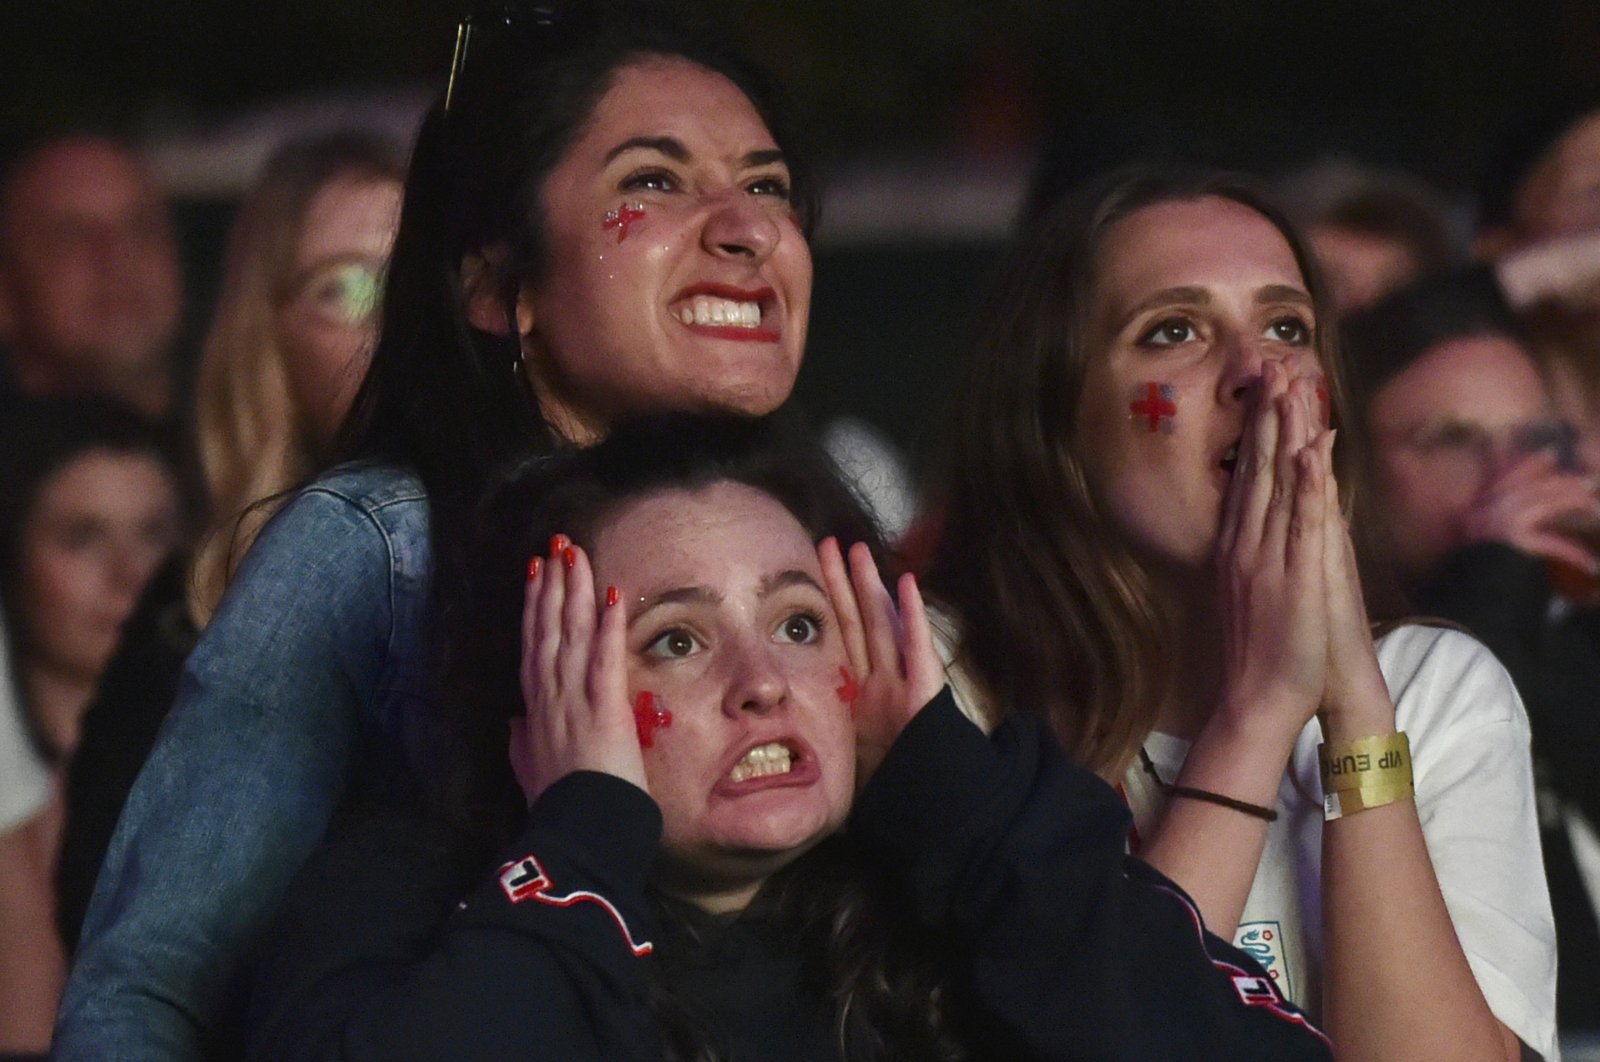 English supporters react watching the Euro 2020 final between England and Italy at a fan zone in Manchester, England, July 11, 2021. (AP Photo)